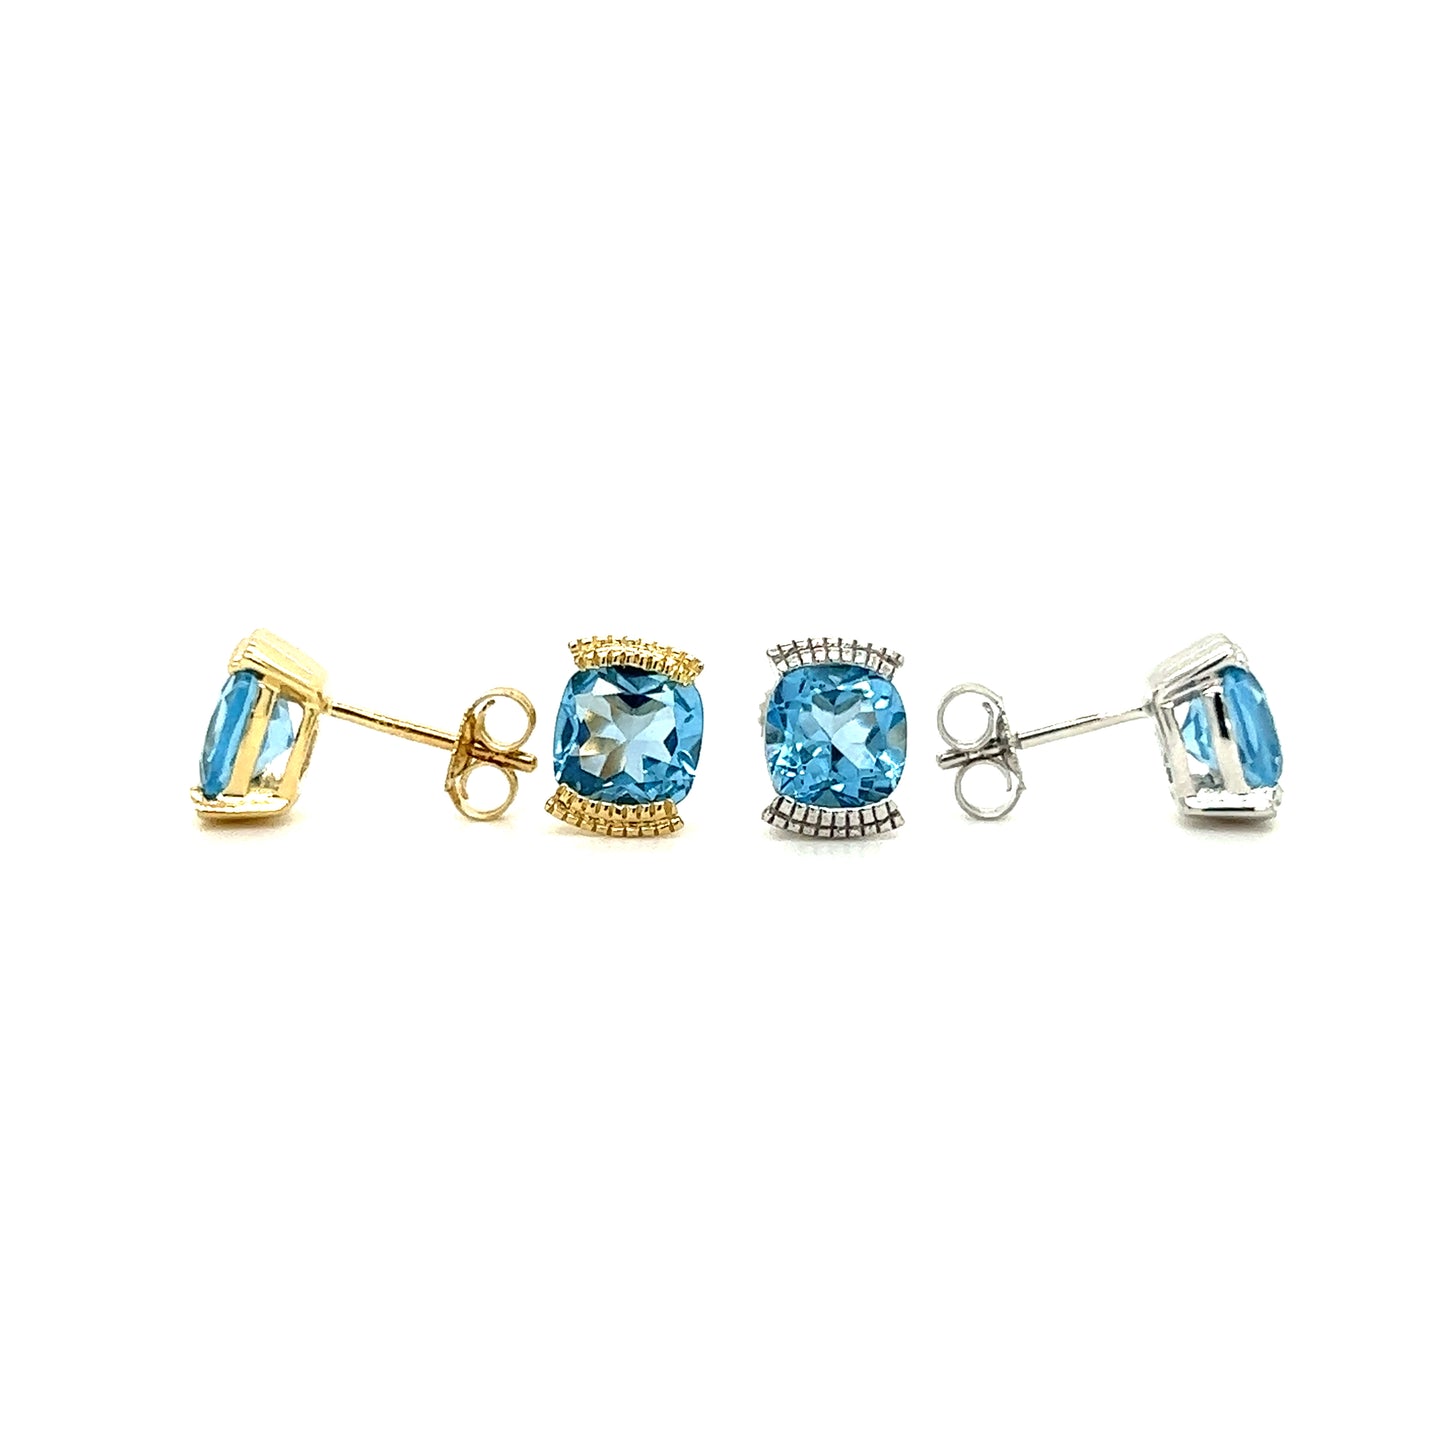 Cushion Blue Topaz Stud Earrings with 1.78ctw of Swiss Blue Topaz in 14K Gold Front and Side View